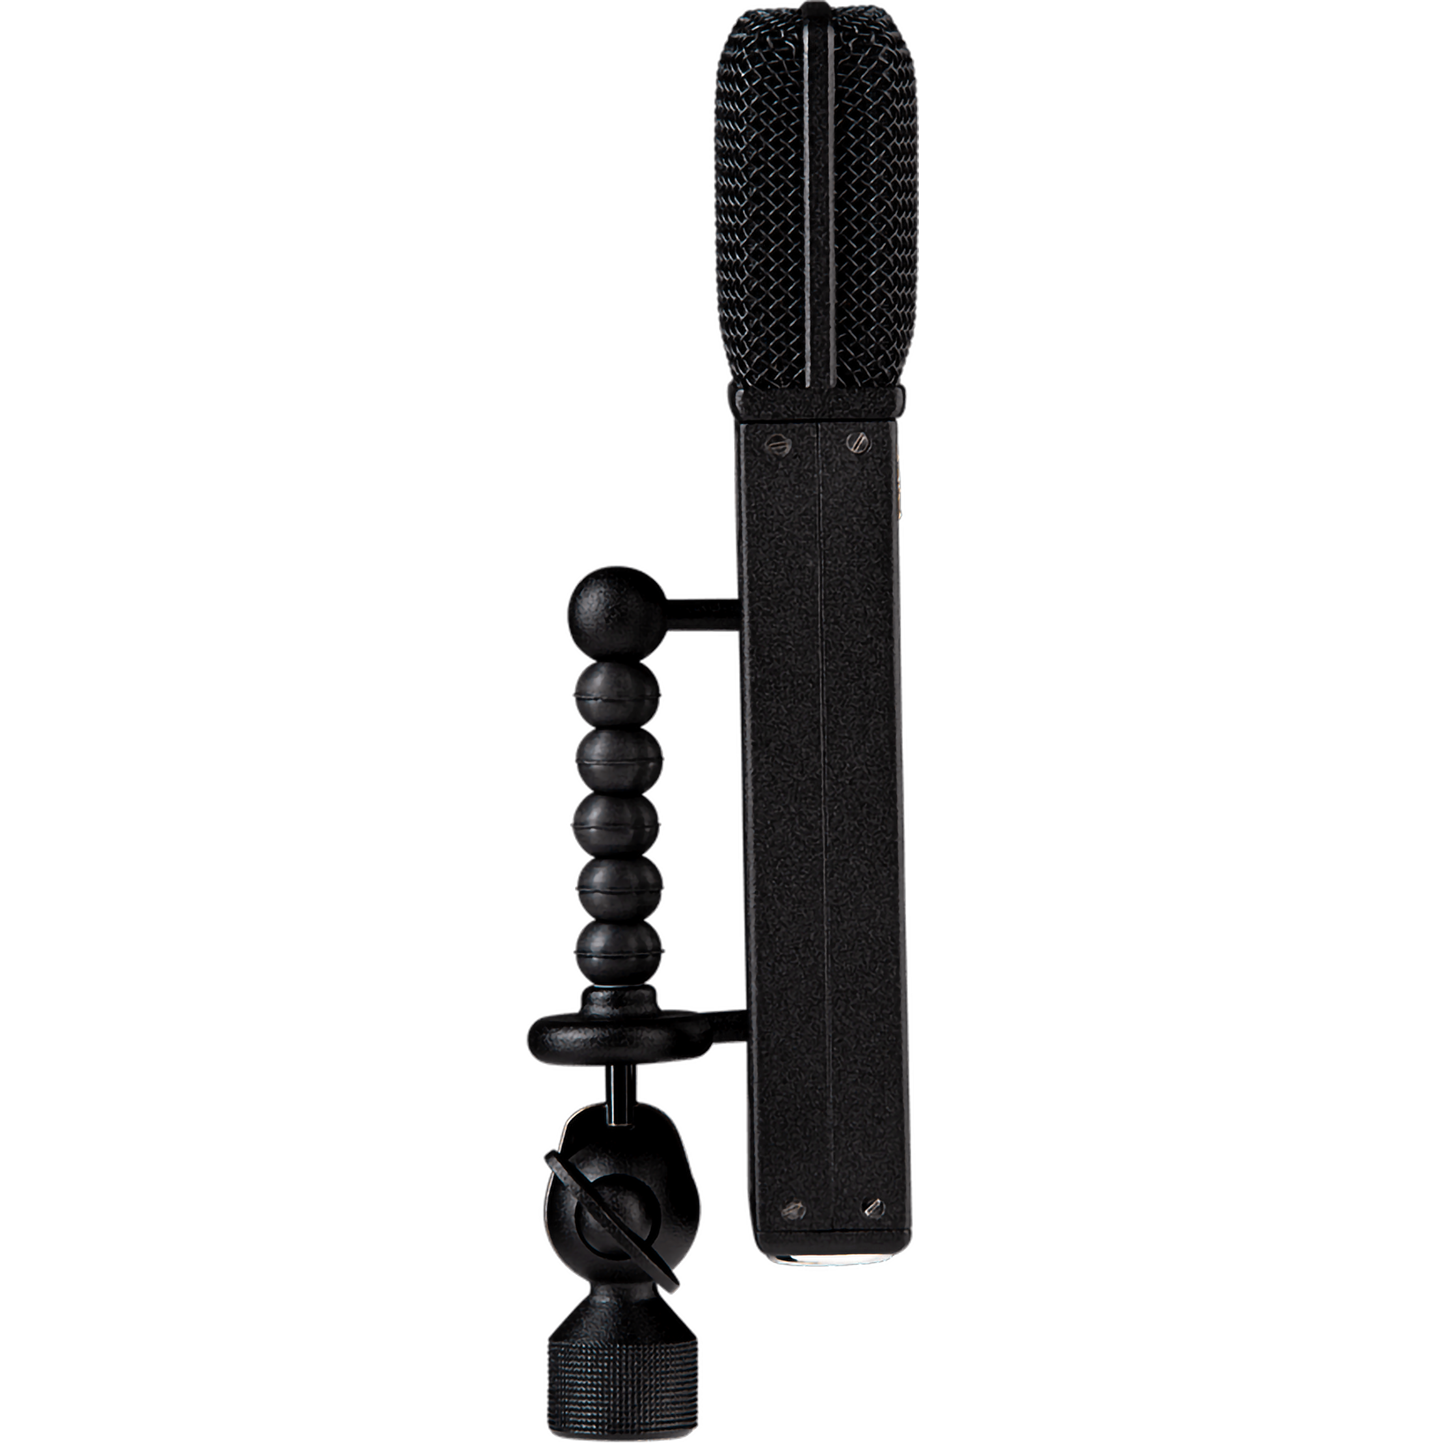 JZ Microphones The Black Hole BH1s Multi-Pattern Condenser Microphone